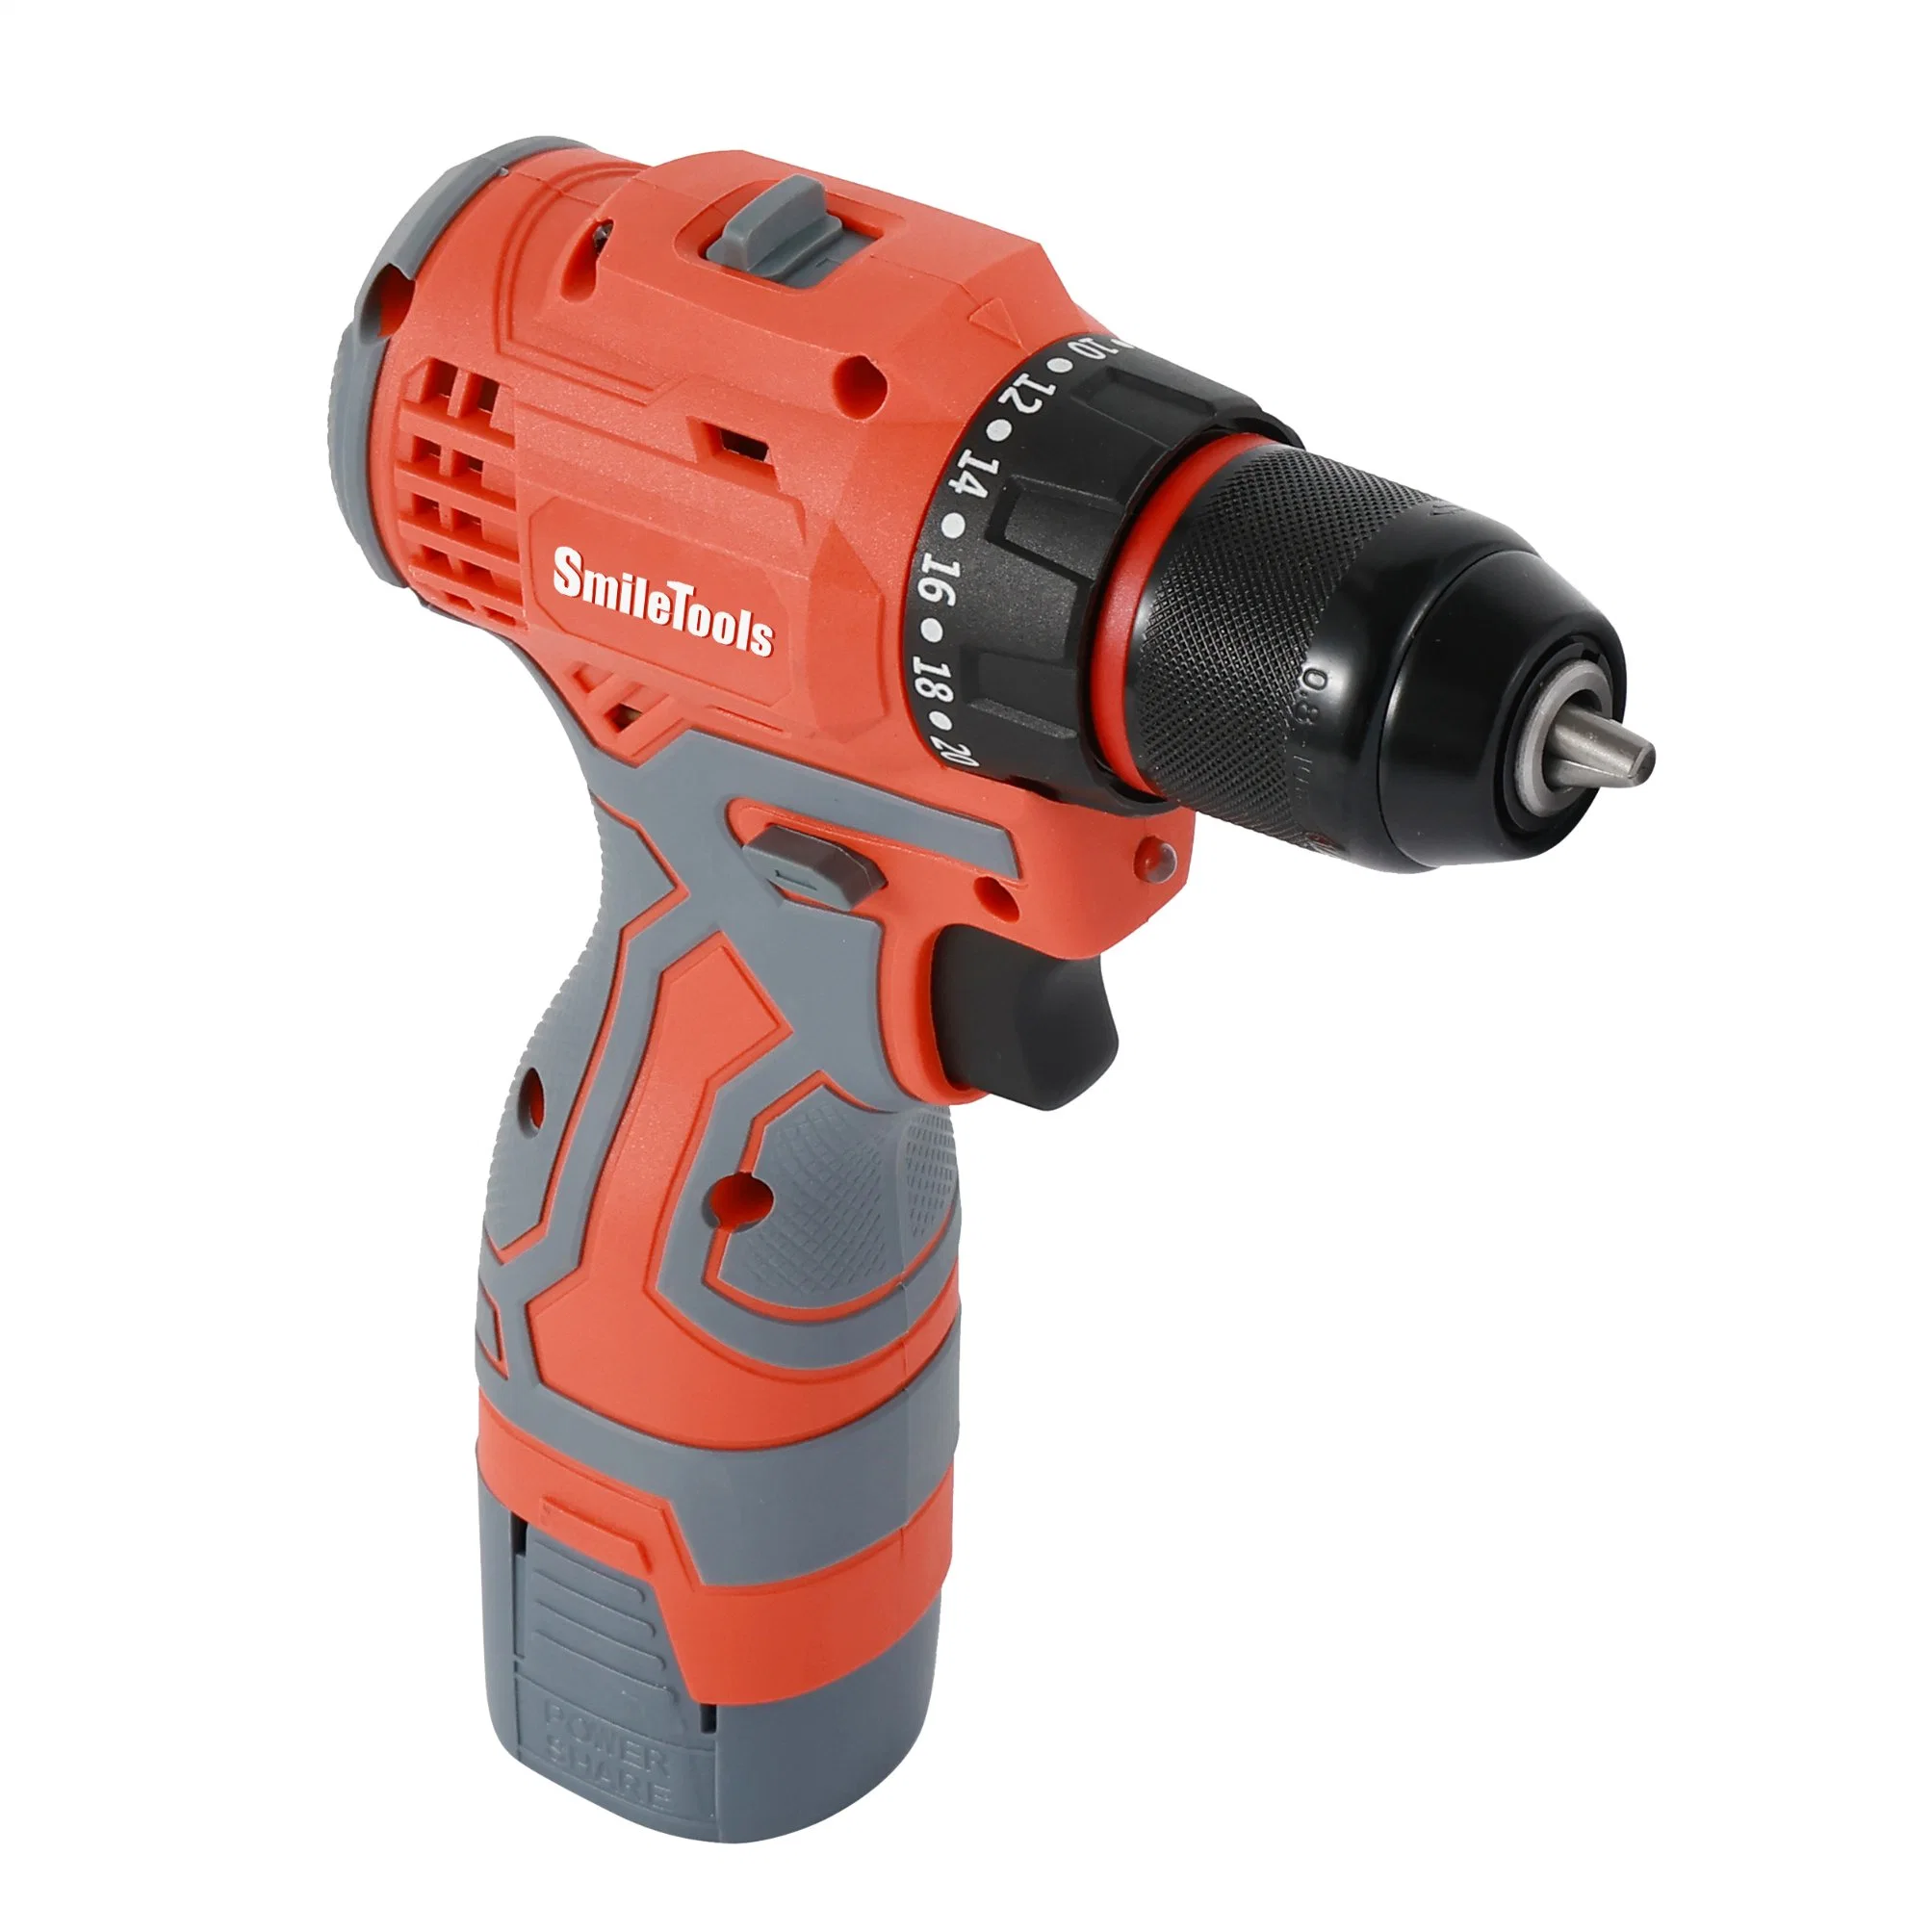 20V Portable Lithium Battery Power Cordless Impact Drill Multifunction Electric Hand Drill Industrial Electric Screwdriver Set